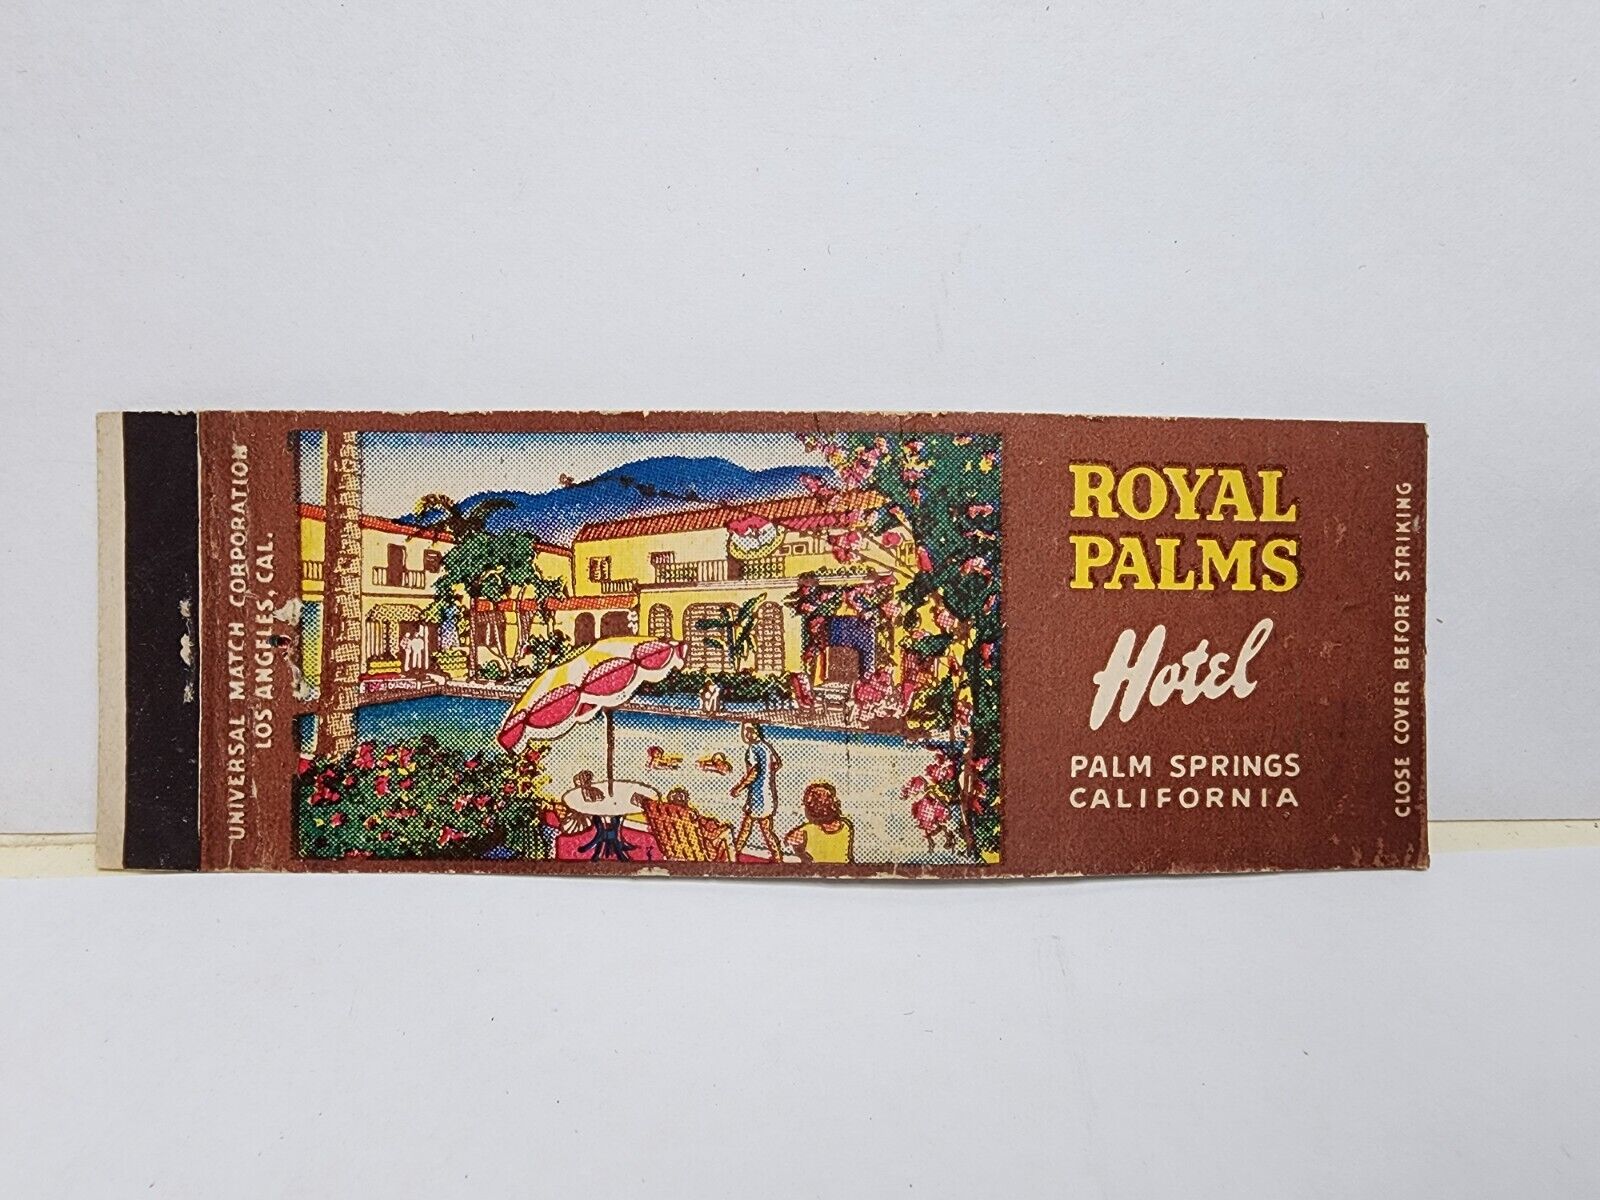 Vintage Matchbook Cover - ROYAL PALMS HOTEL - Palm Springs CA Full Length Book